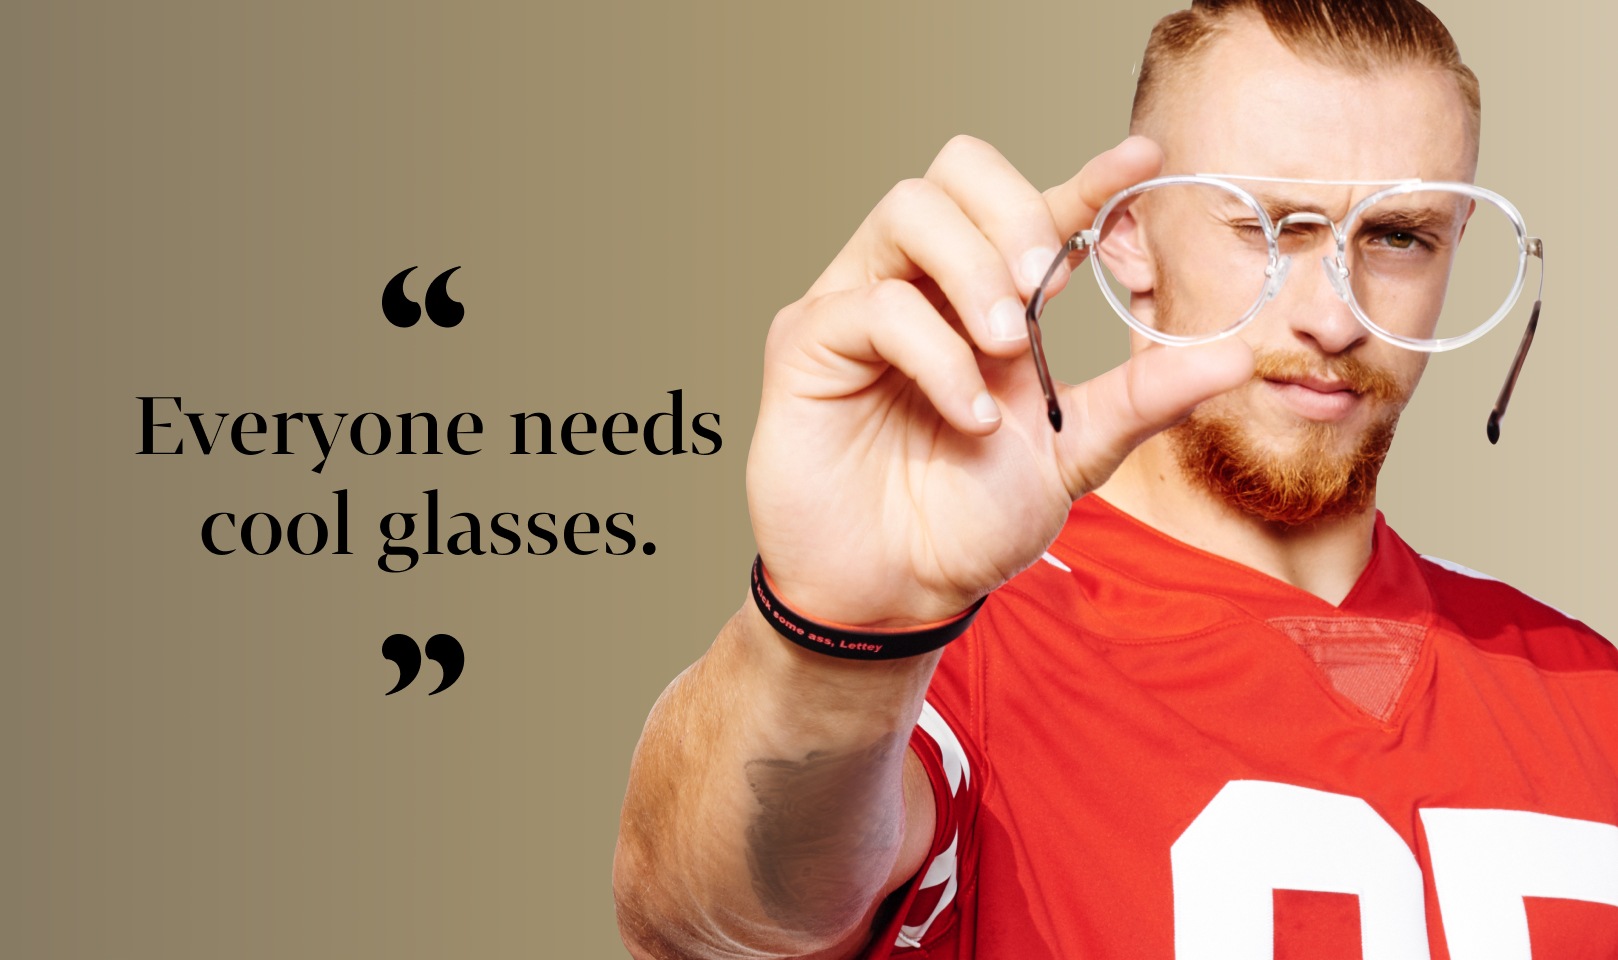 ‘Everyone needs cool glasses.’ George Kittle, holding Zenni hawkeyes aviator glasses #1150423, in front of a gold background.